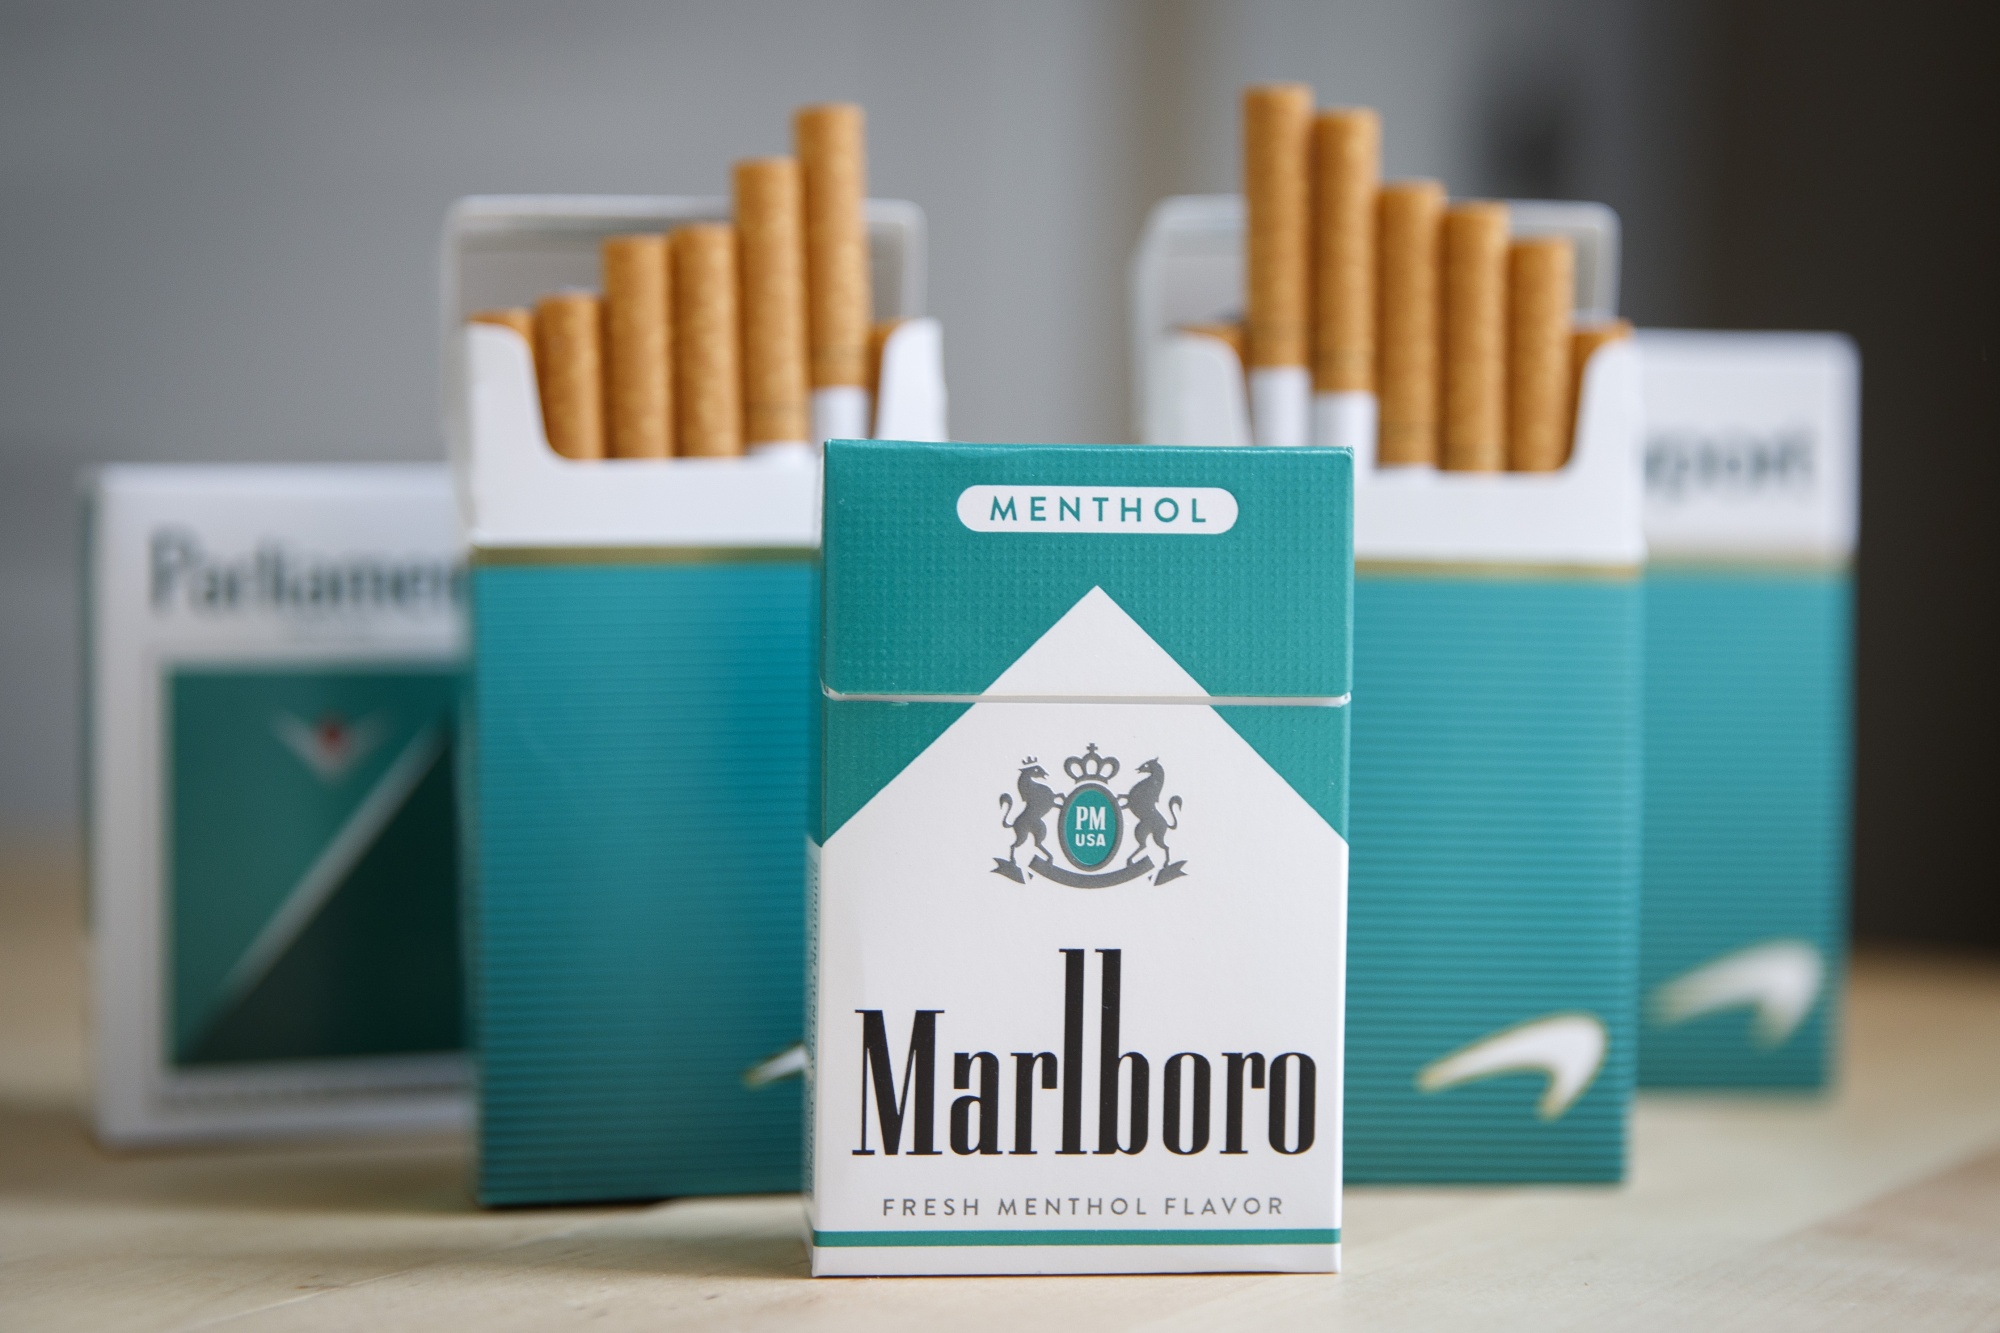 Marlboro per-pack prices increase for third time in 2023